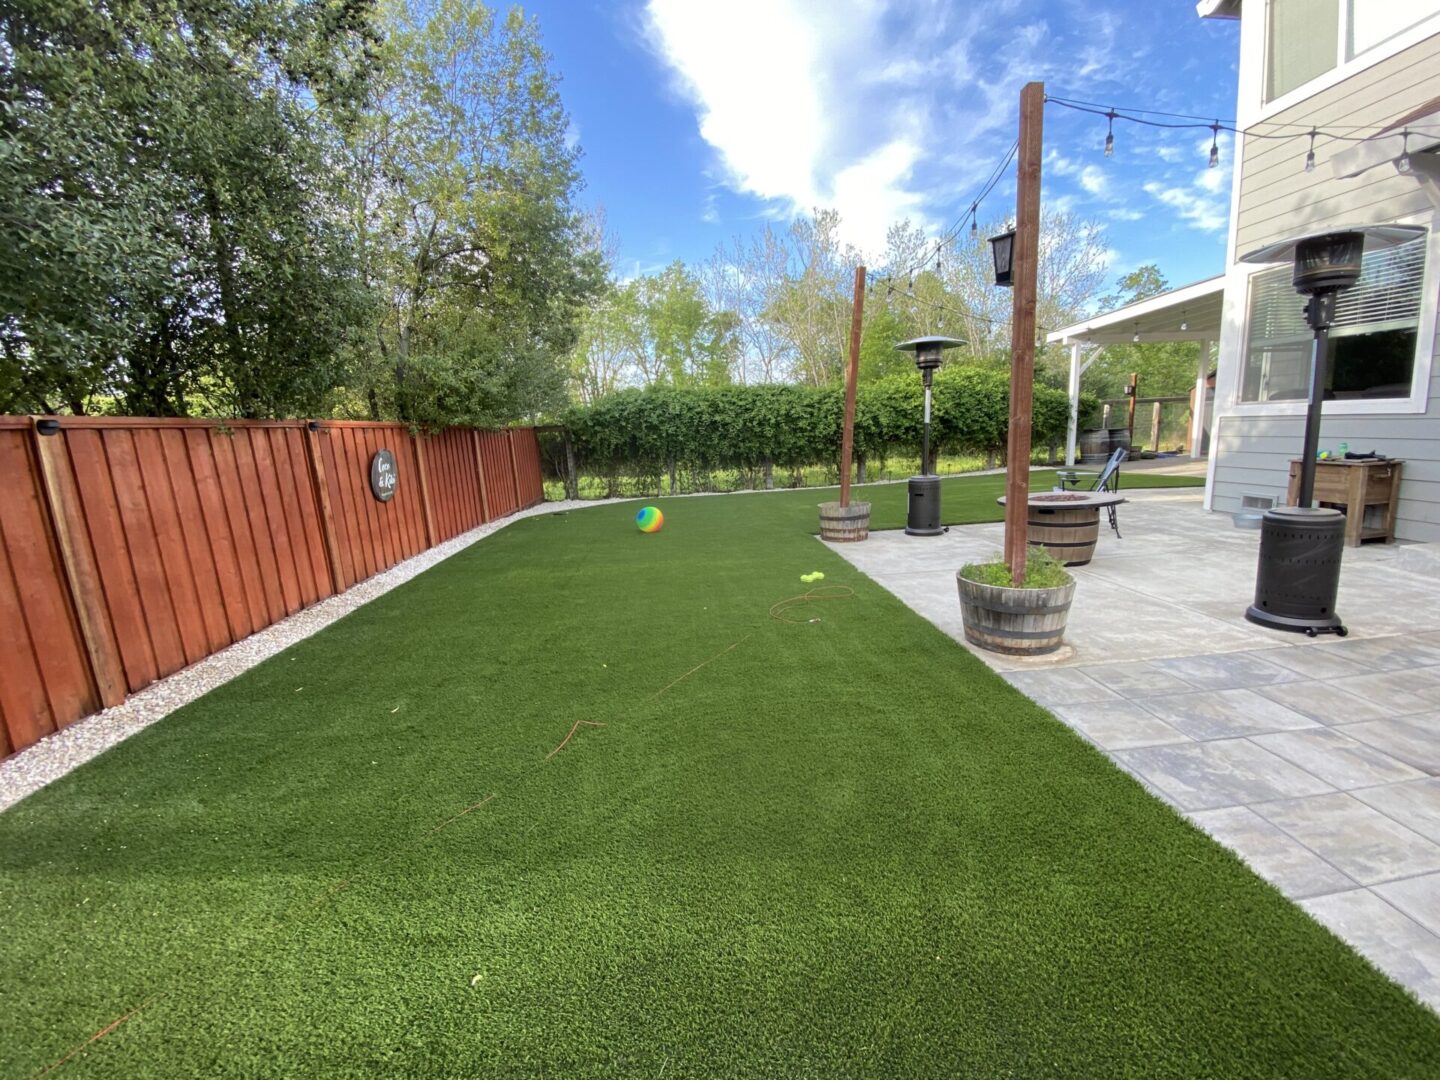 Artificial grass with concrete backyard area, landscaping by Guys Yard Design in Sonoma, CA